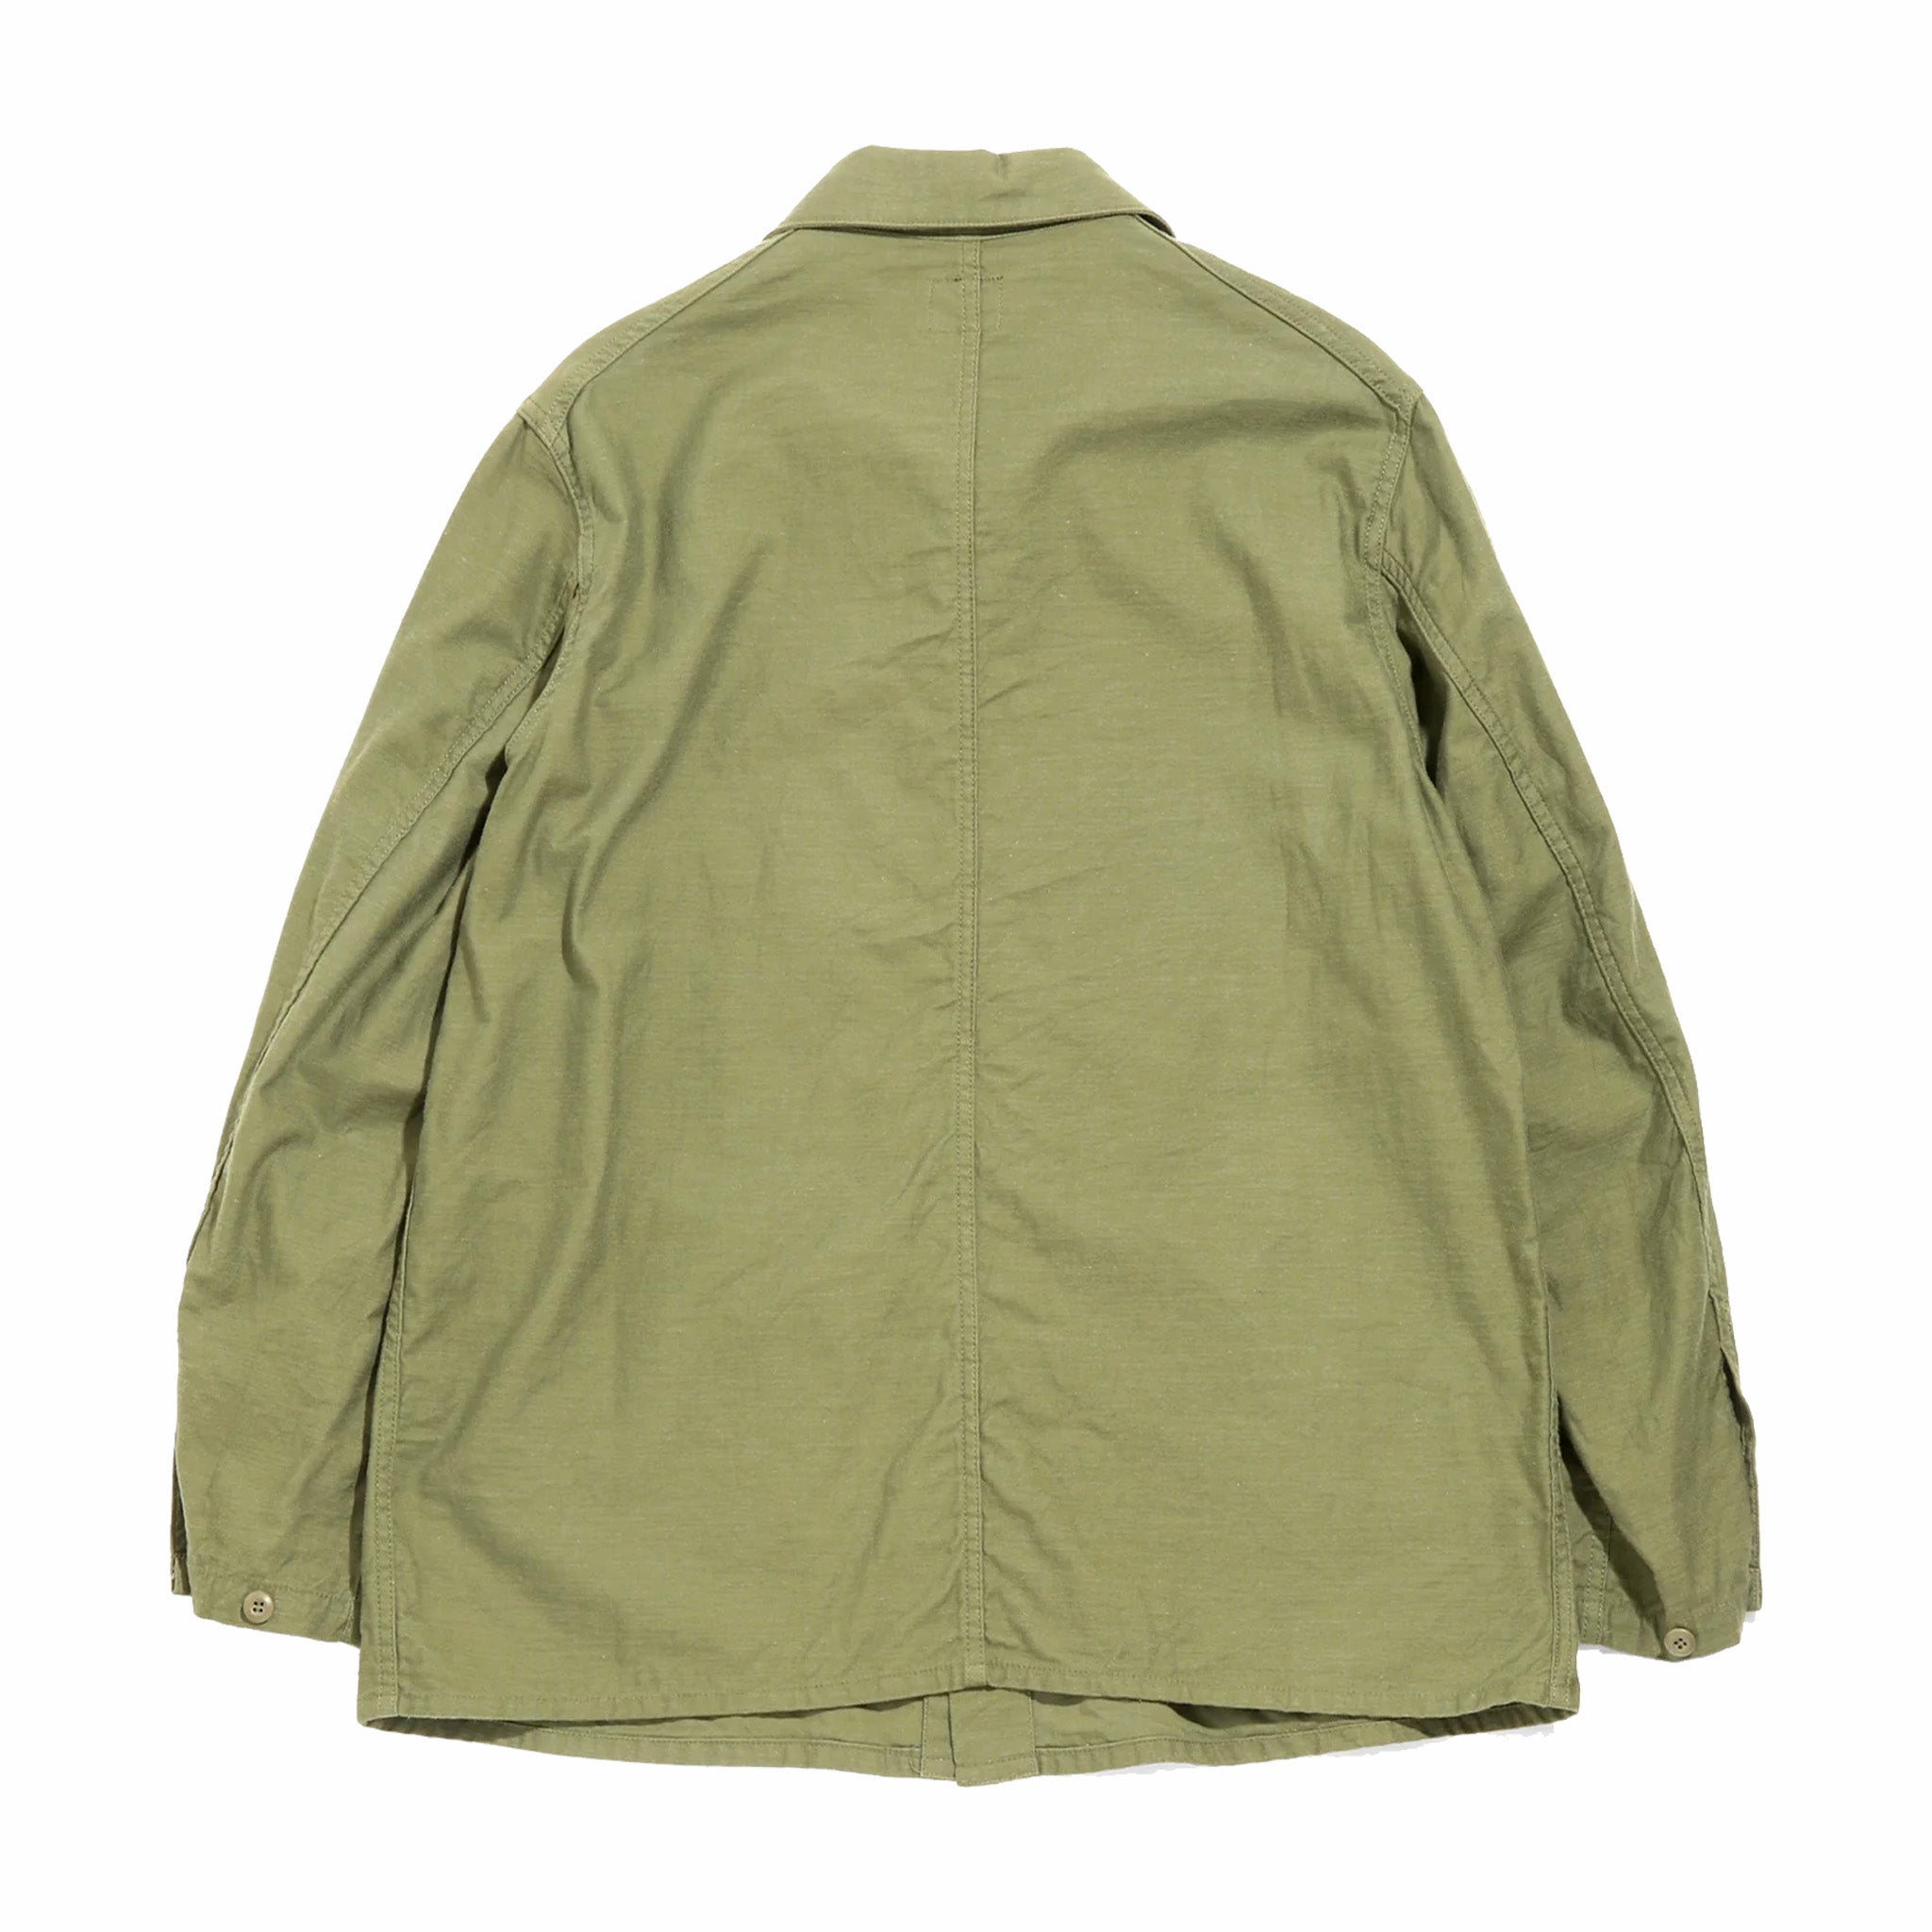 Needles D.N. Coverall Shirt - Back Sateen (Olive) - August Shop